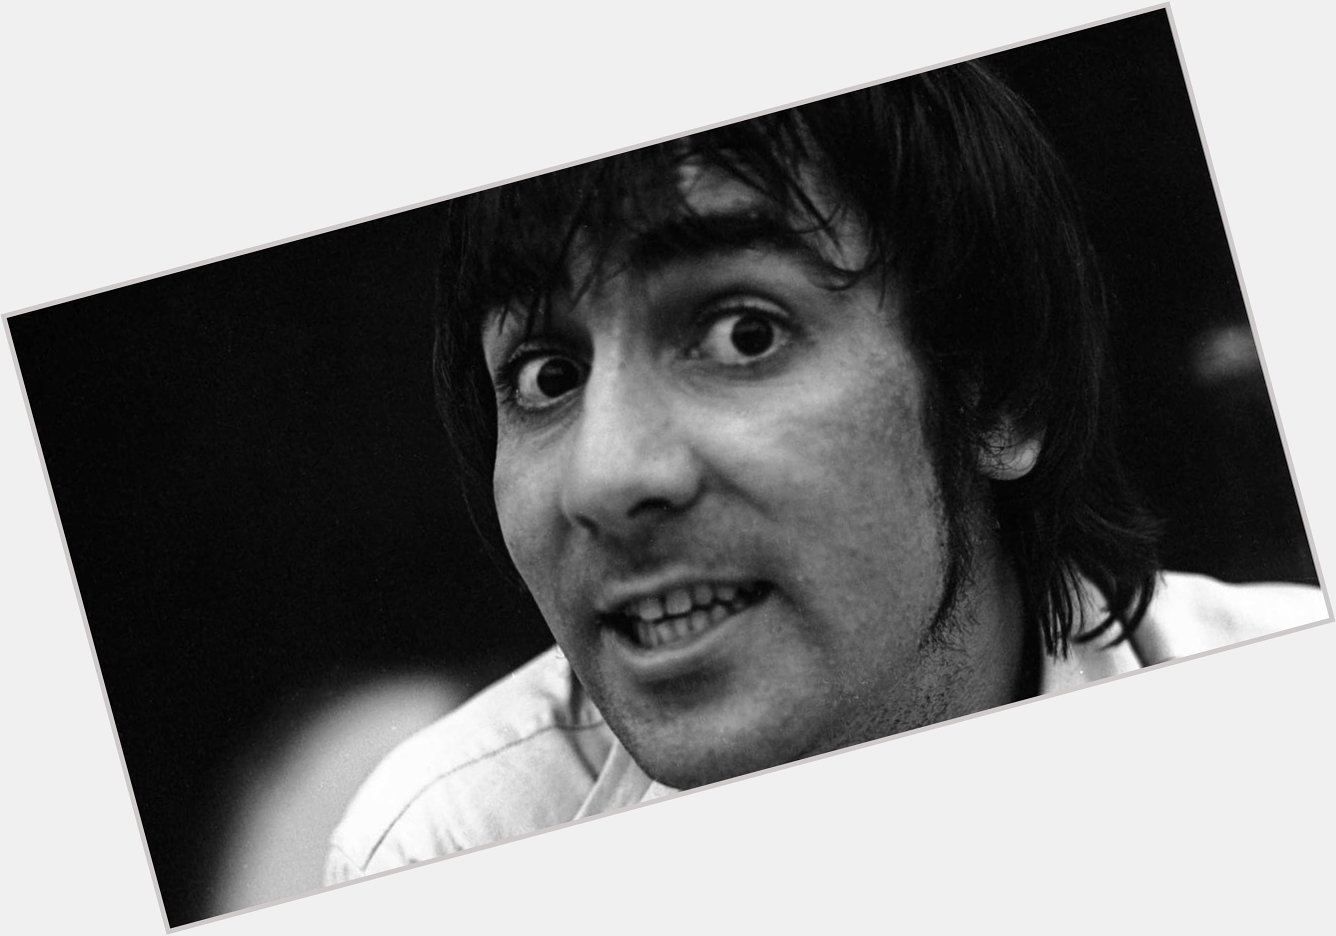 Happy birthday to the late great Keith Moon! 